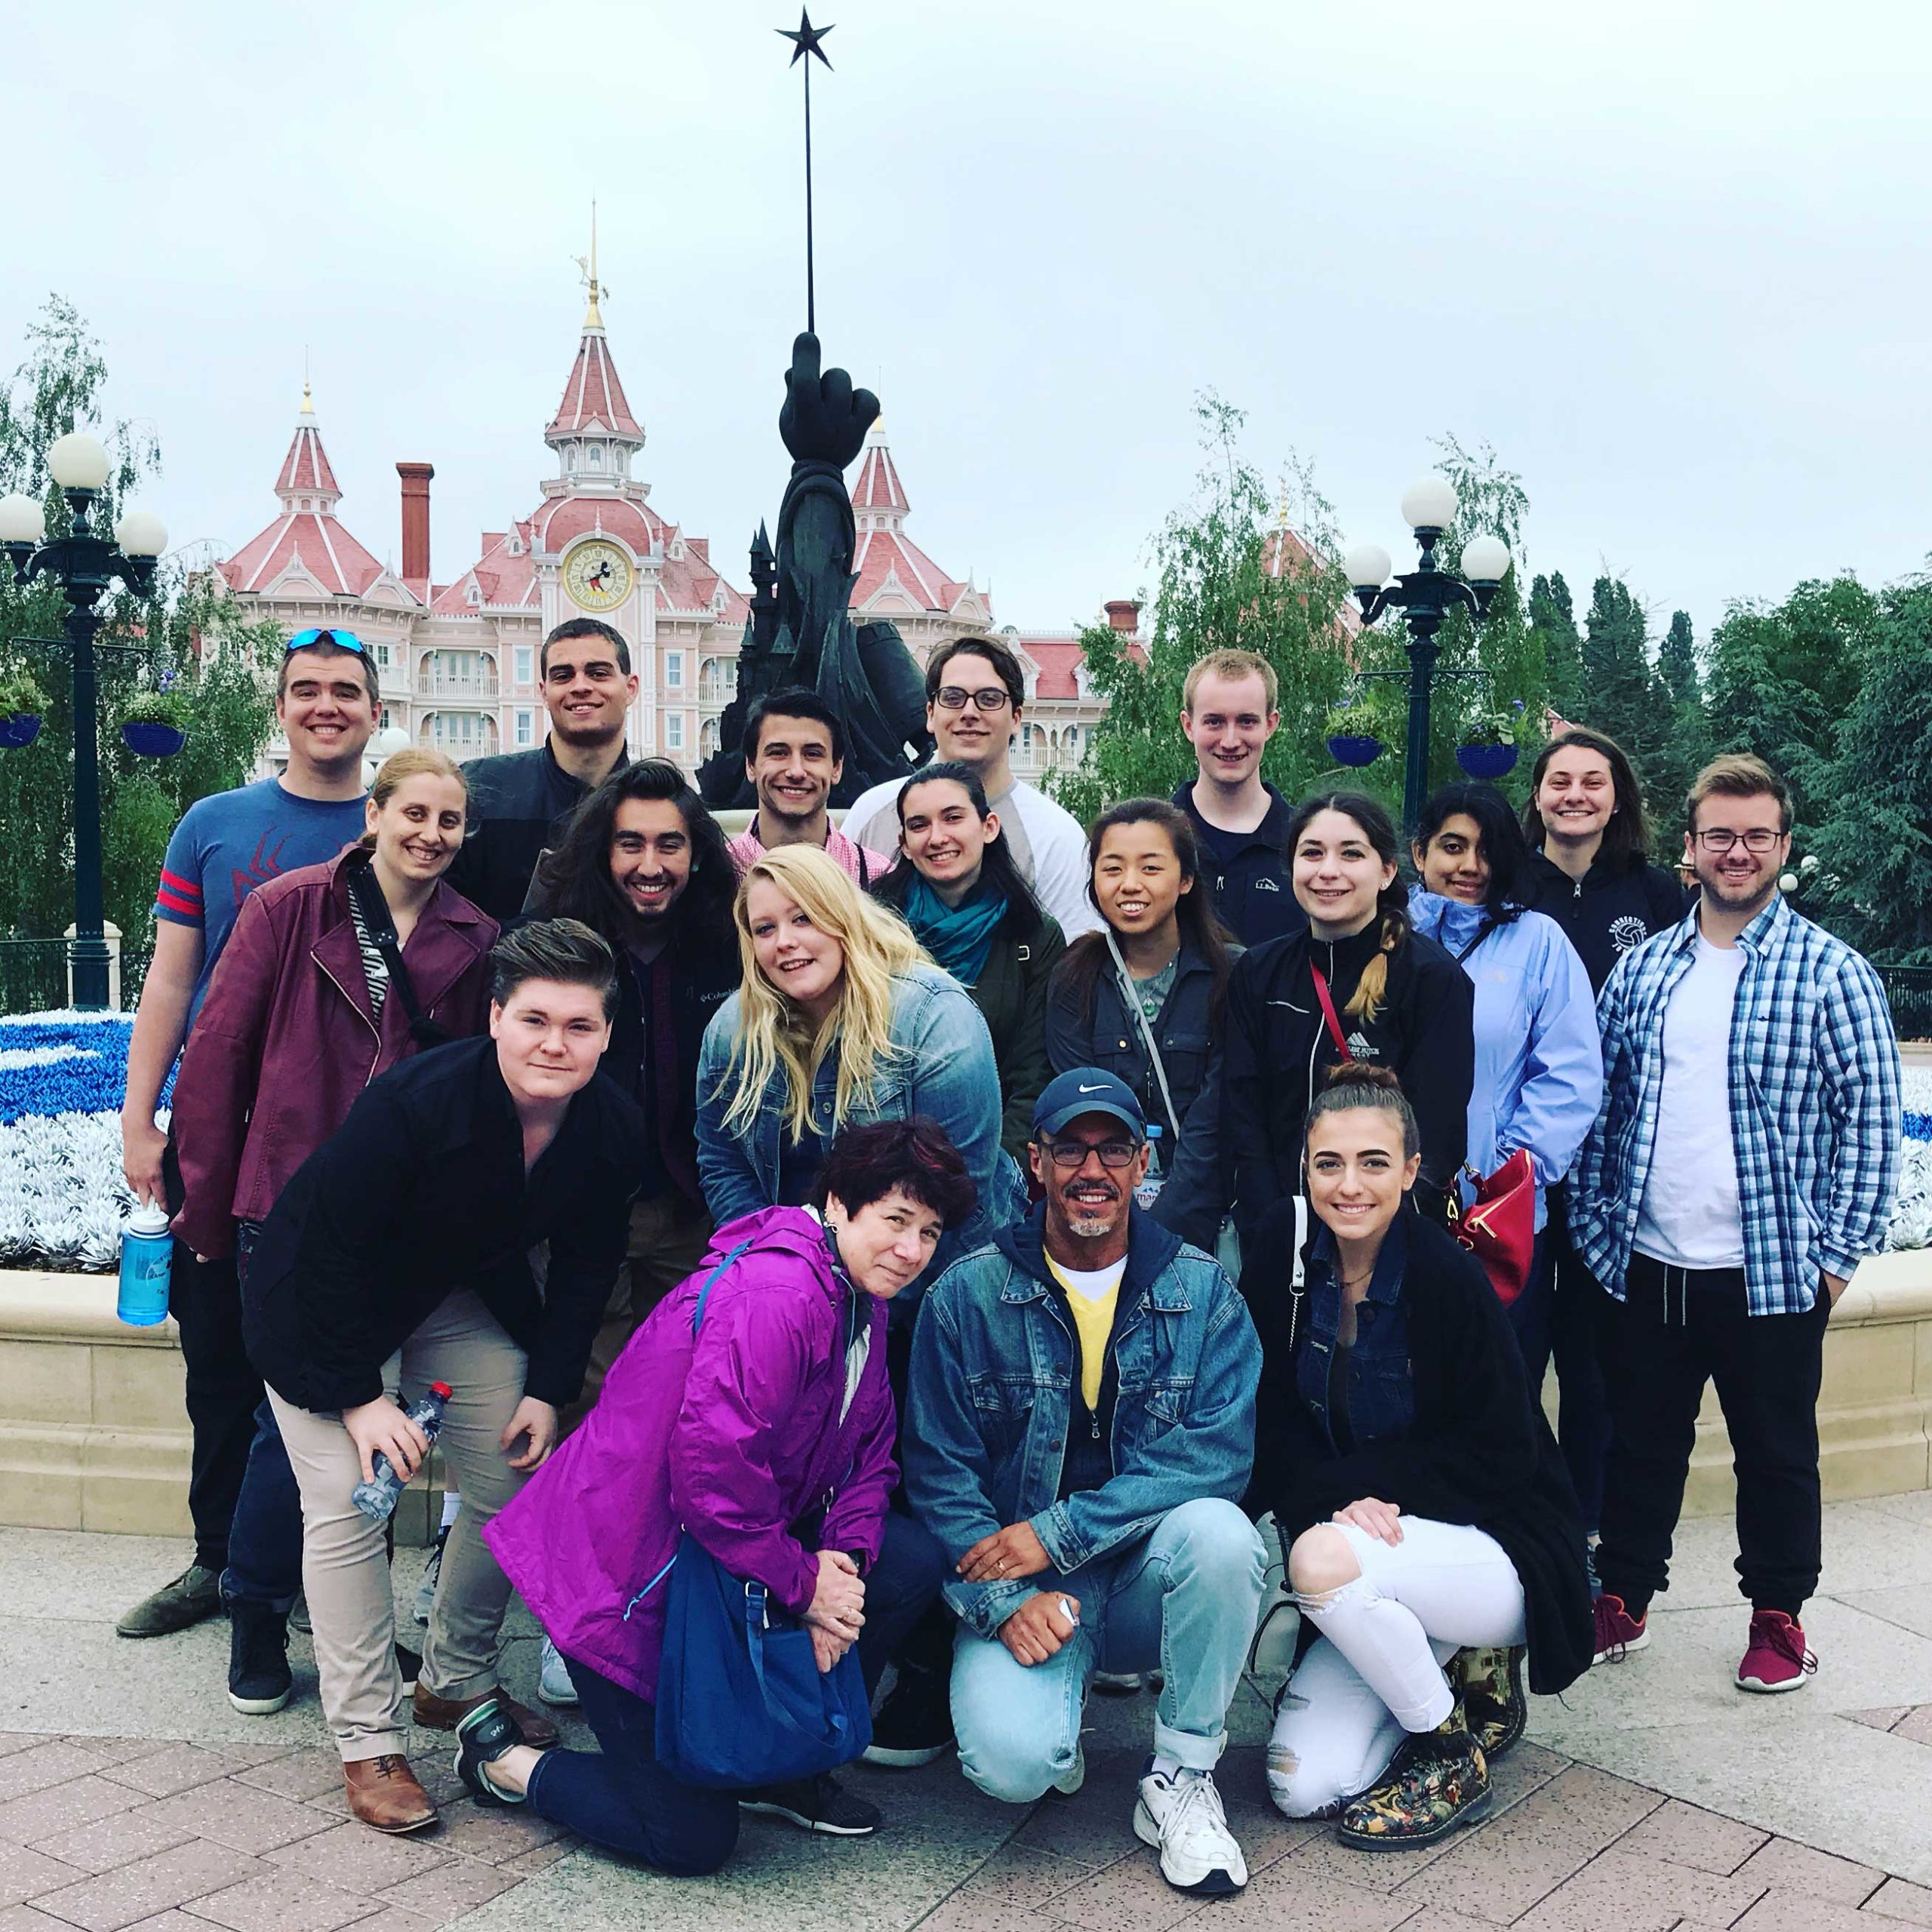 Students and professors taking a group photo in front of a castle at Disneyland Paris. There are a few clusters of blue and white flowers behind them.